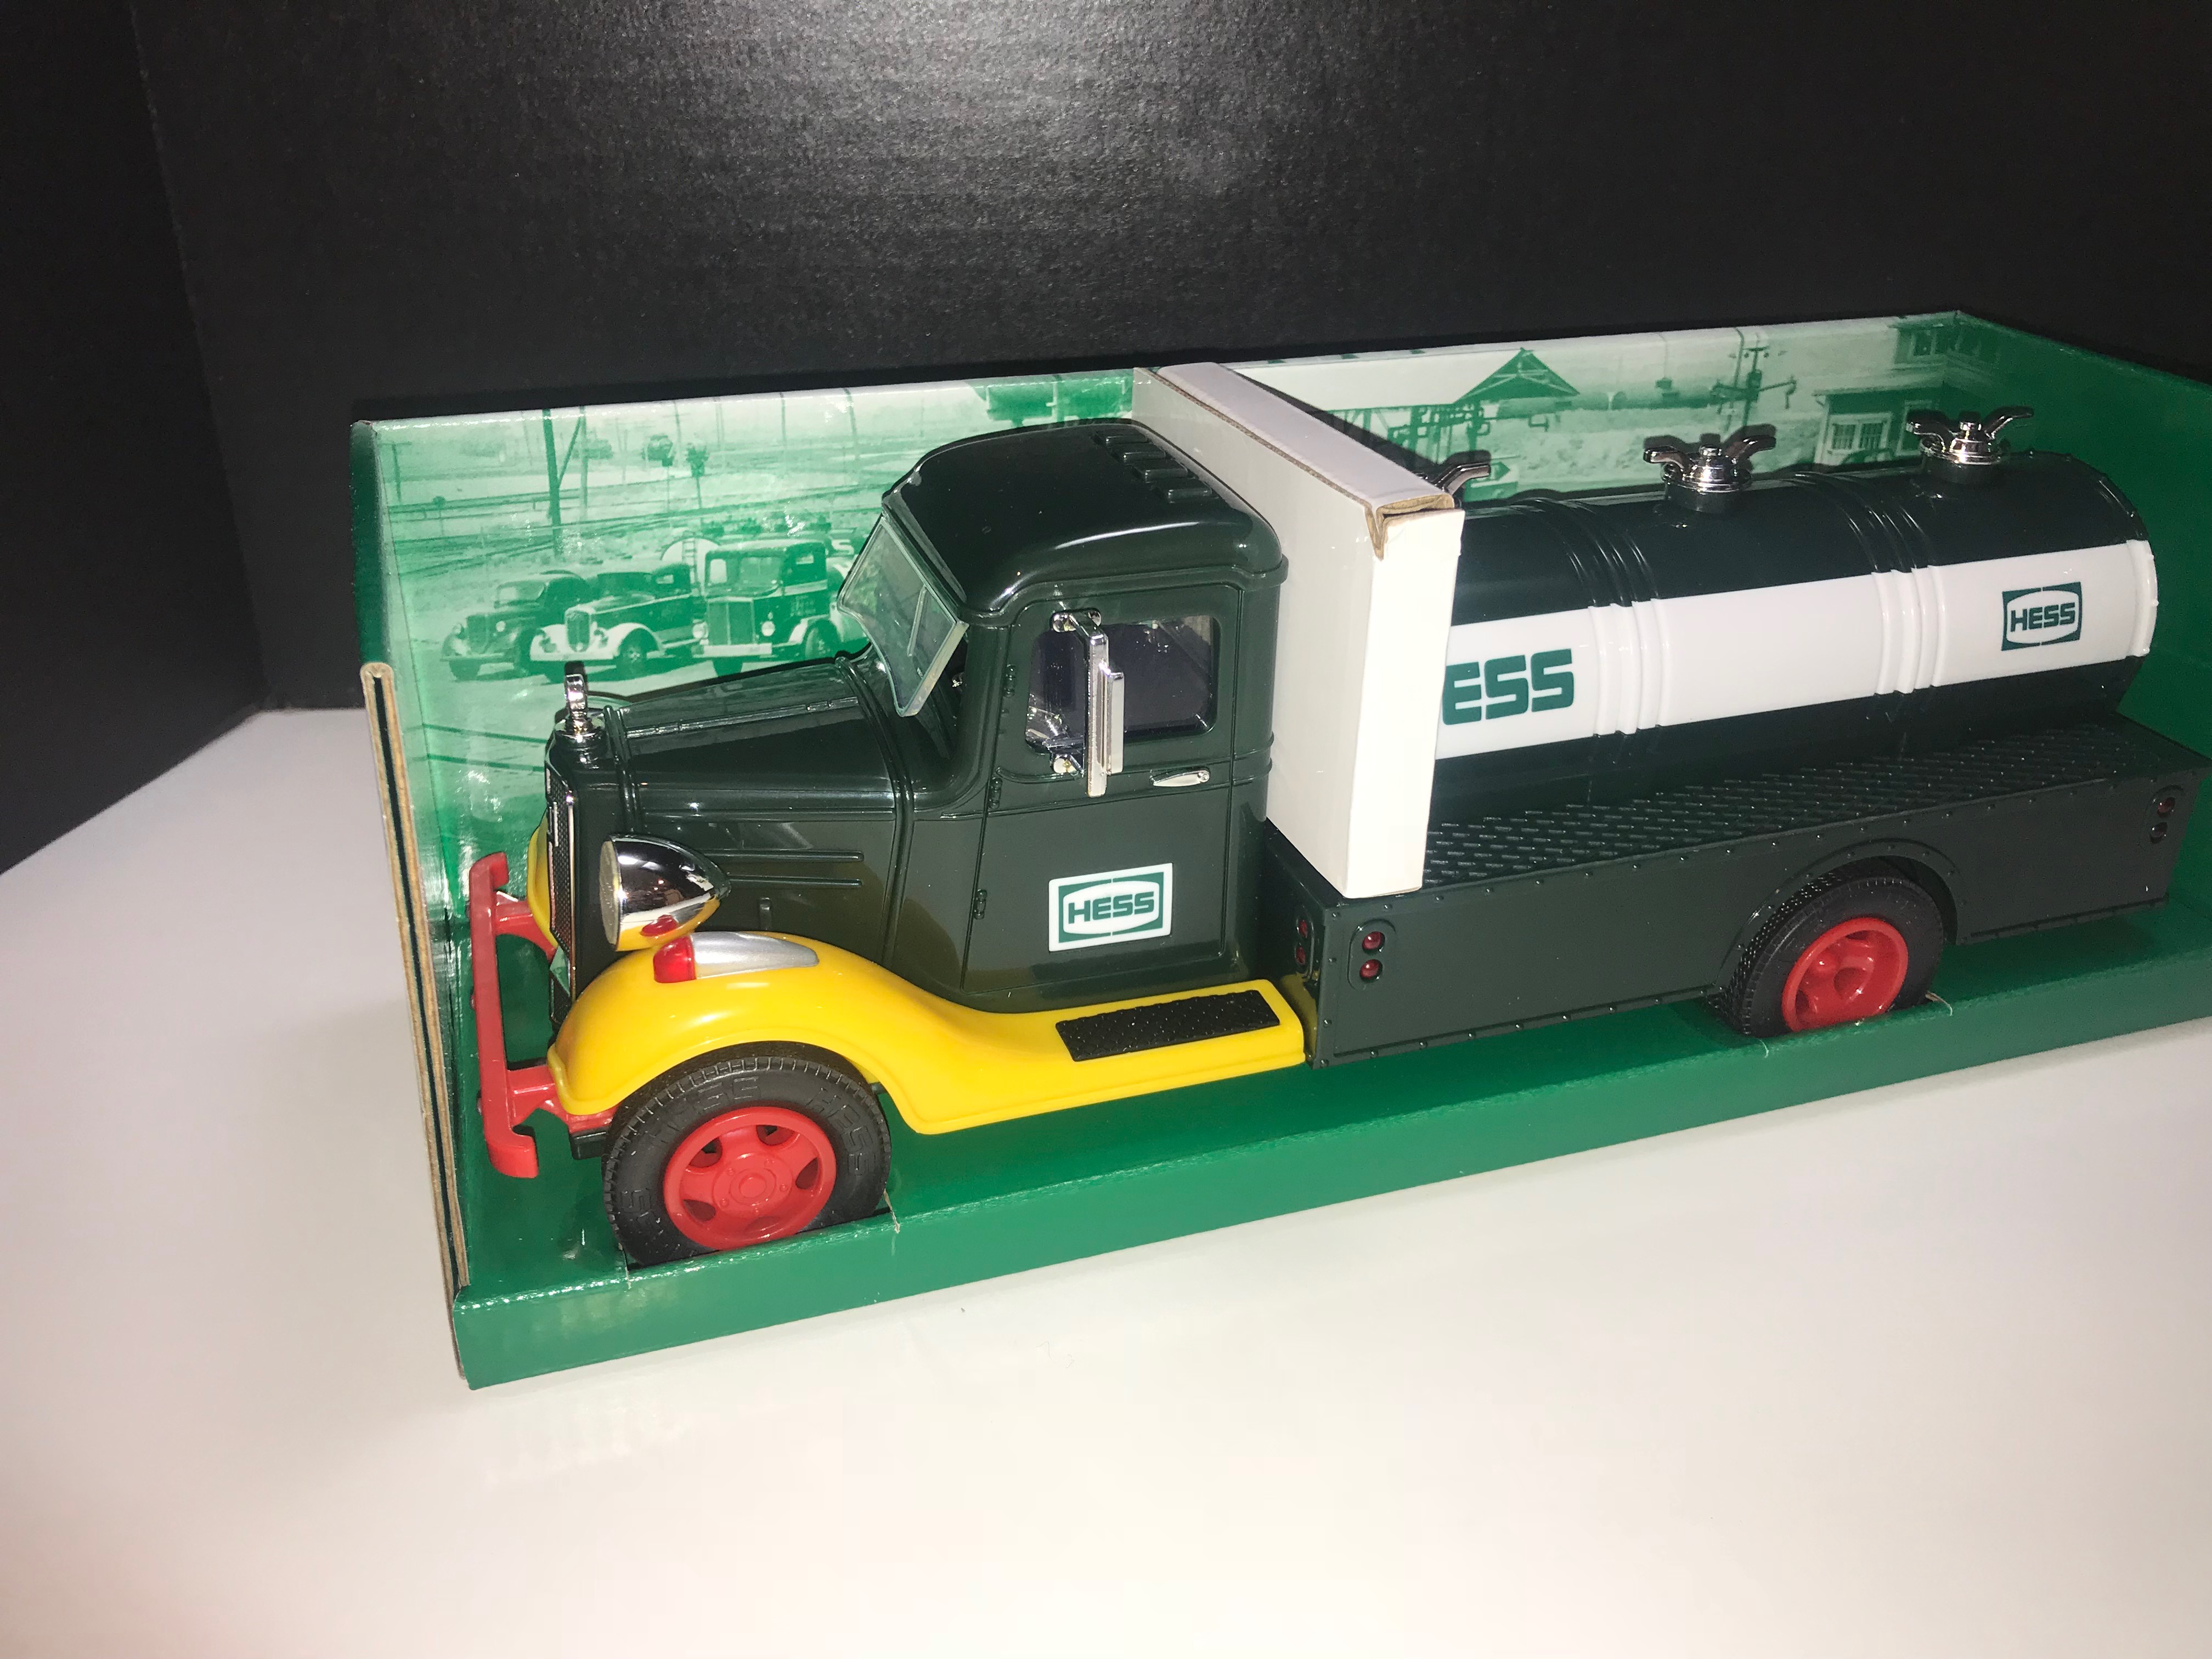 2018 hess truck collector edition